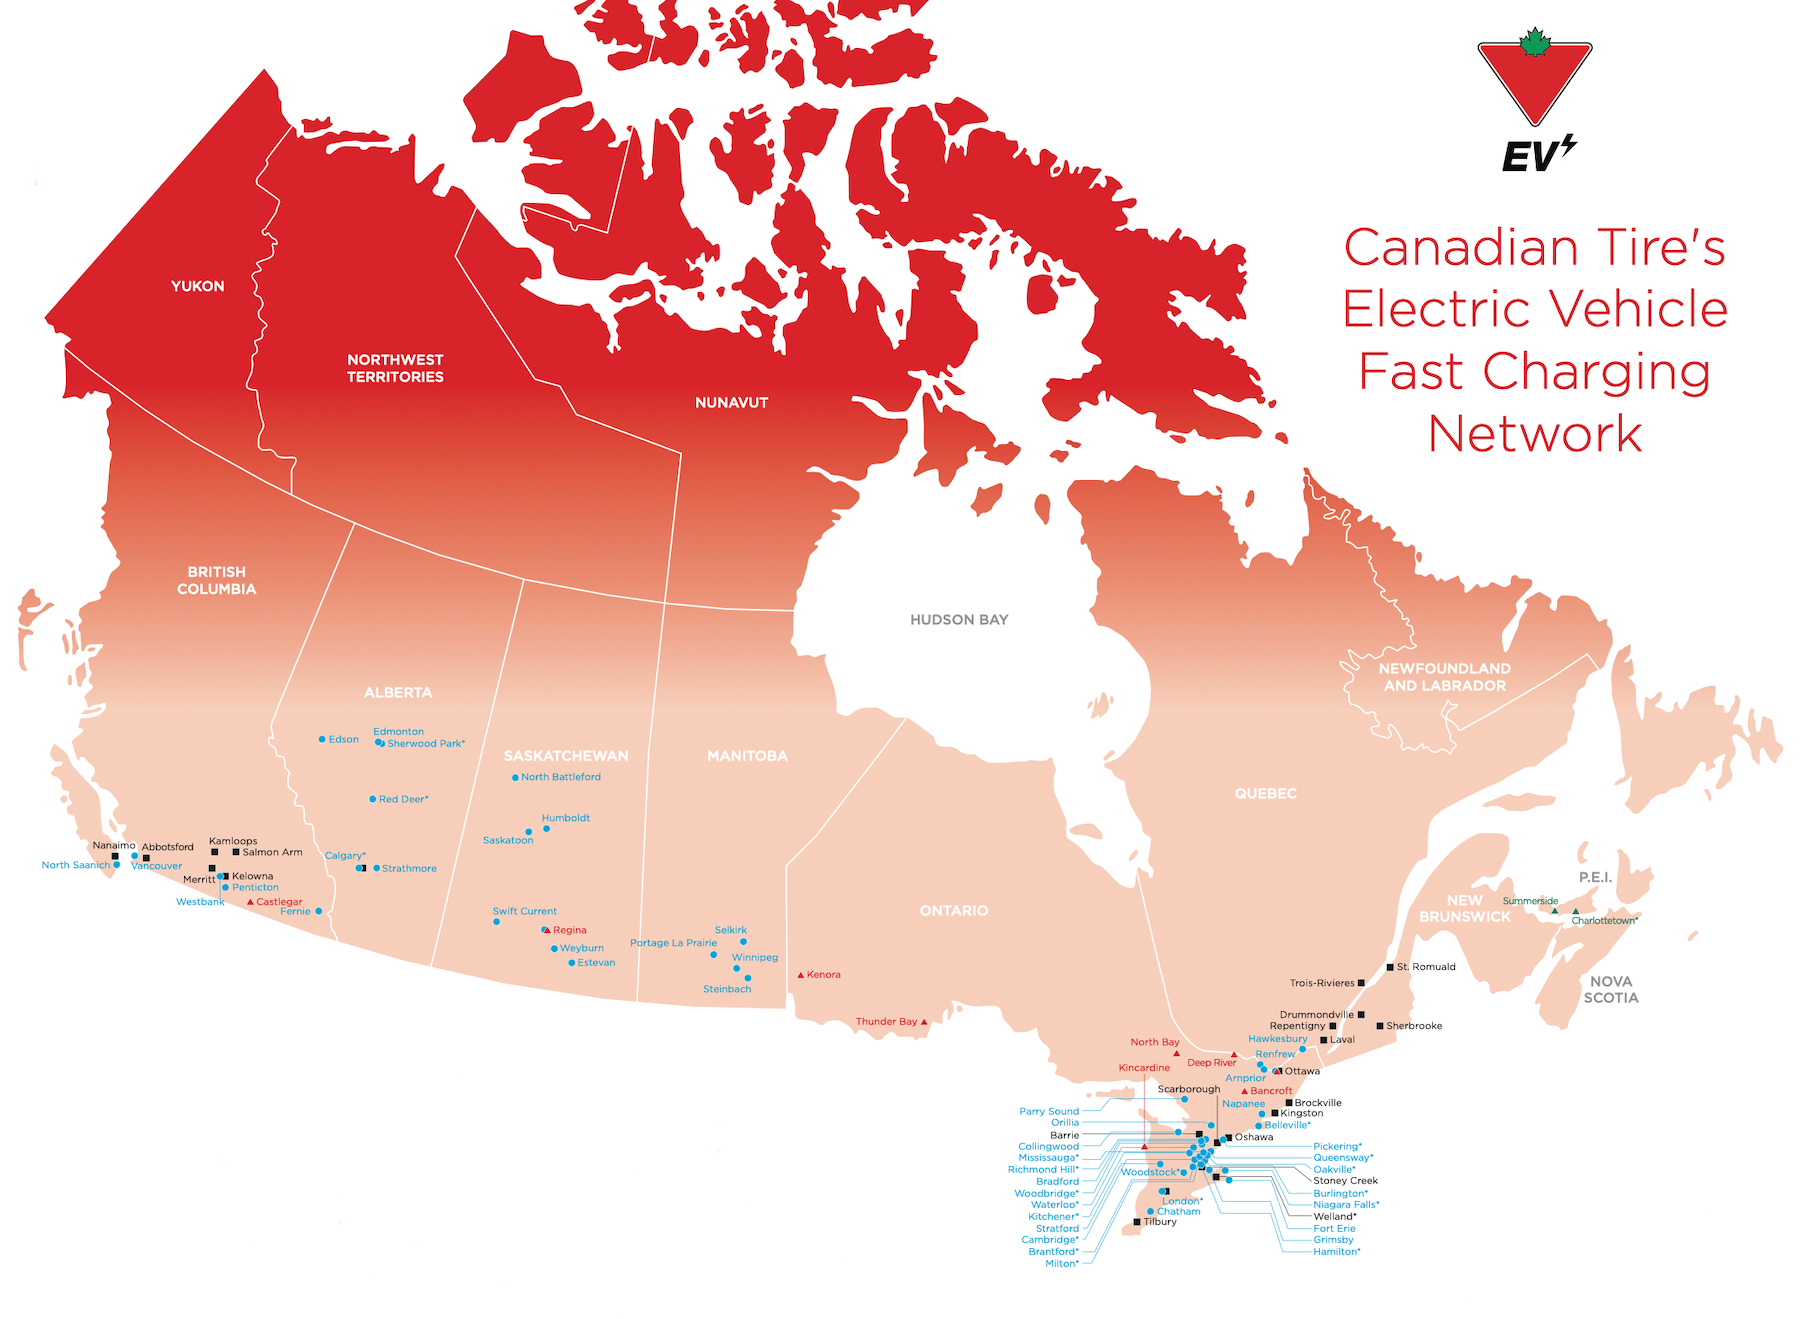 Canadian Tire EV network map